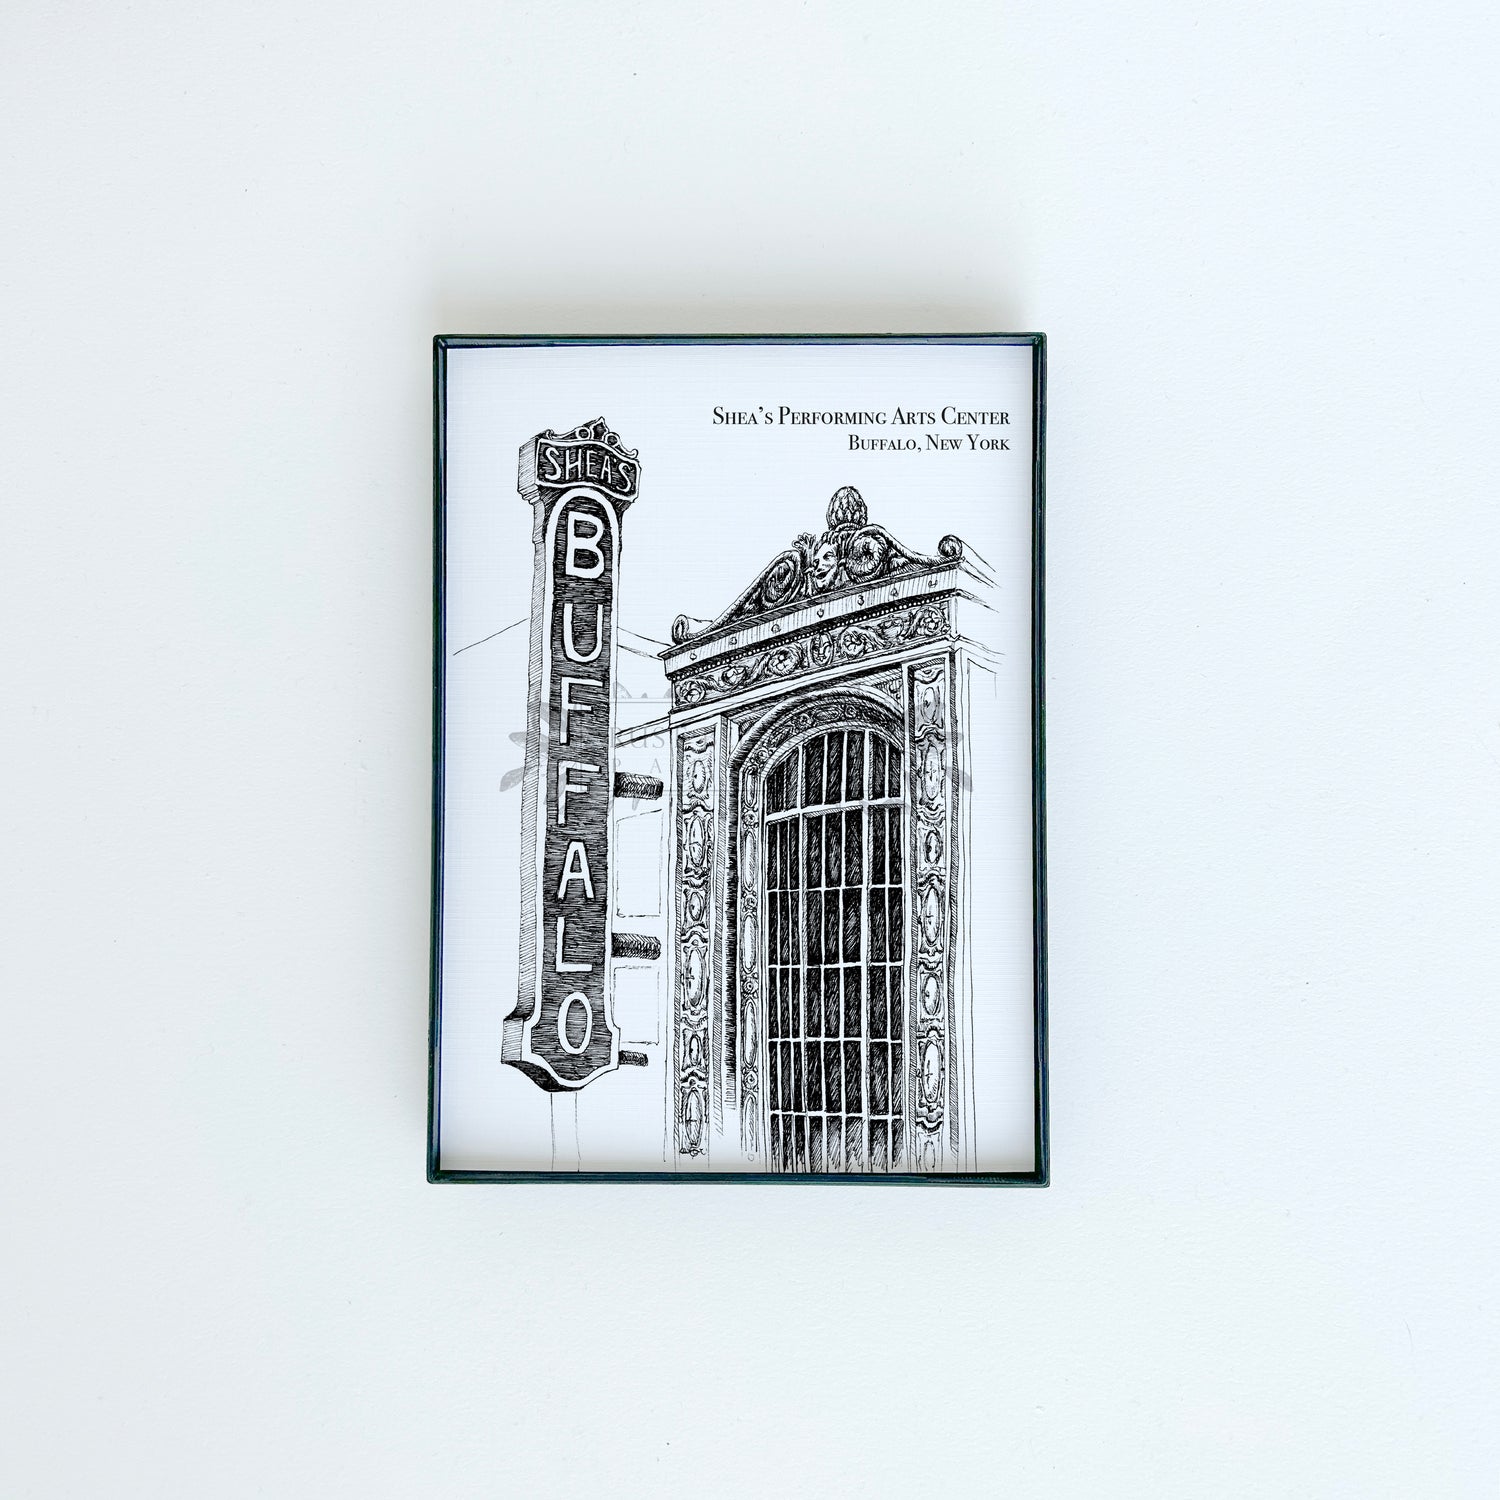 Shea's Performing Arts Center illustration in black ink on white paper by Rust Belt Love